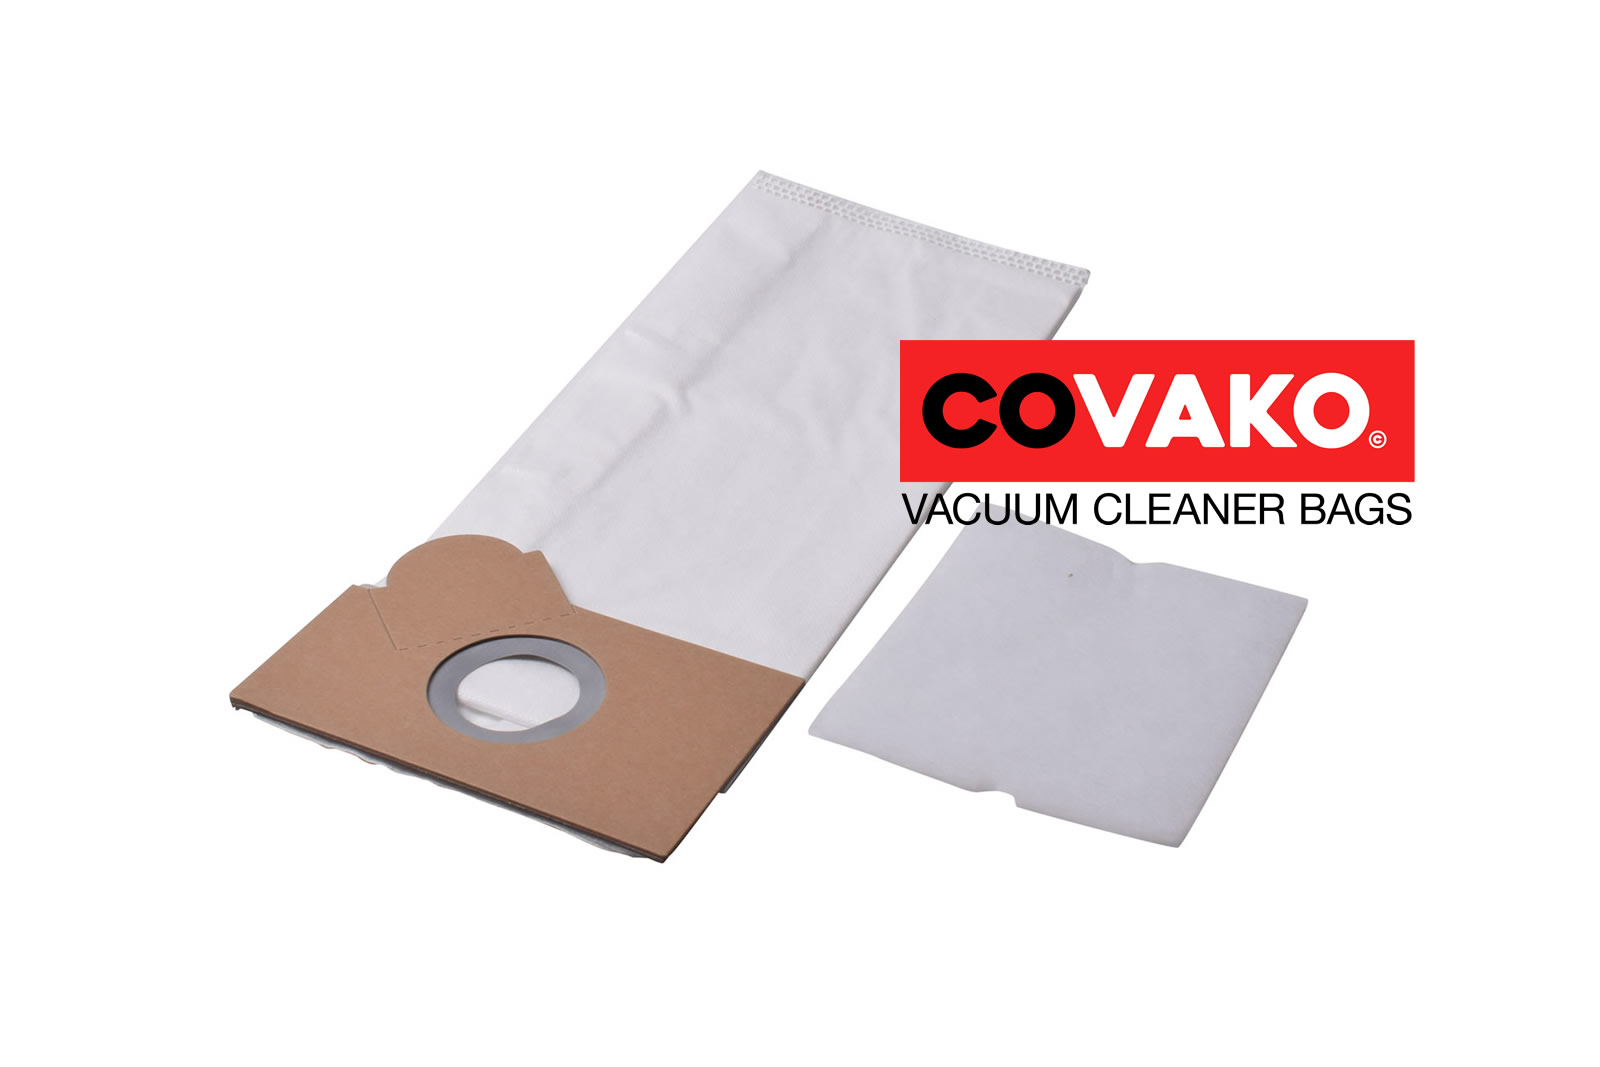 Fakir RS 17 A-45 / Synthesis - Fakir vacuum cleaner bags